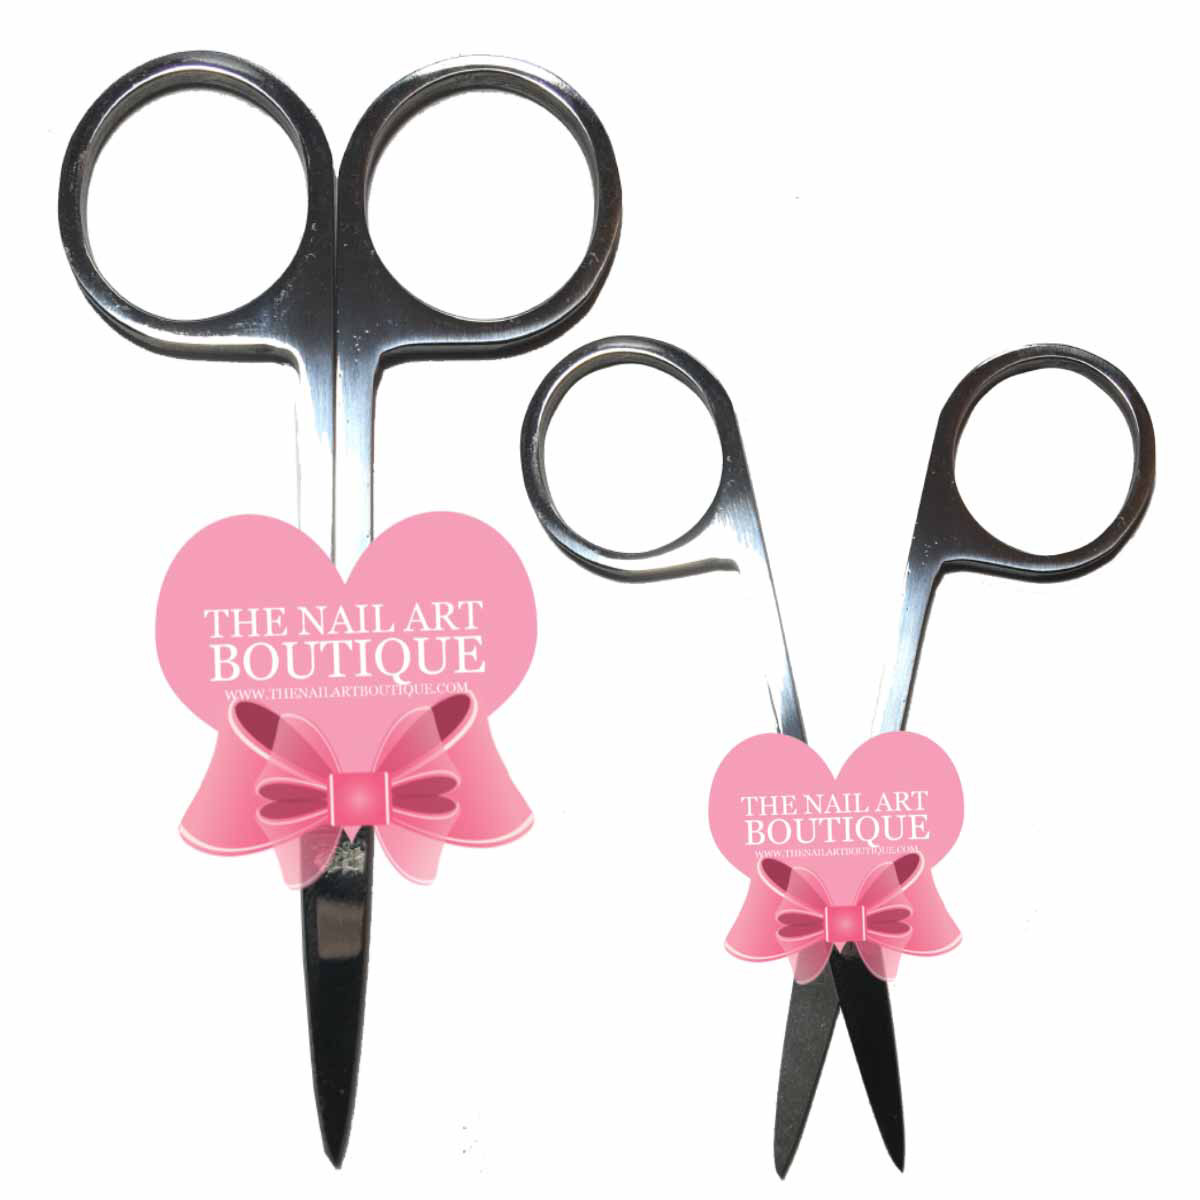 ITEM #112 TIP CUTTER SCISSORS- THESE ARE GREAT FOR CUTTING TIPS WHEN PUTTING ON A NEW NAILS